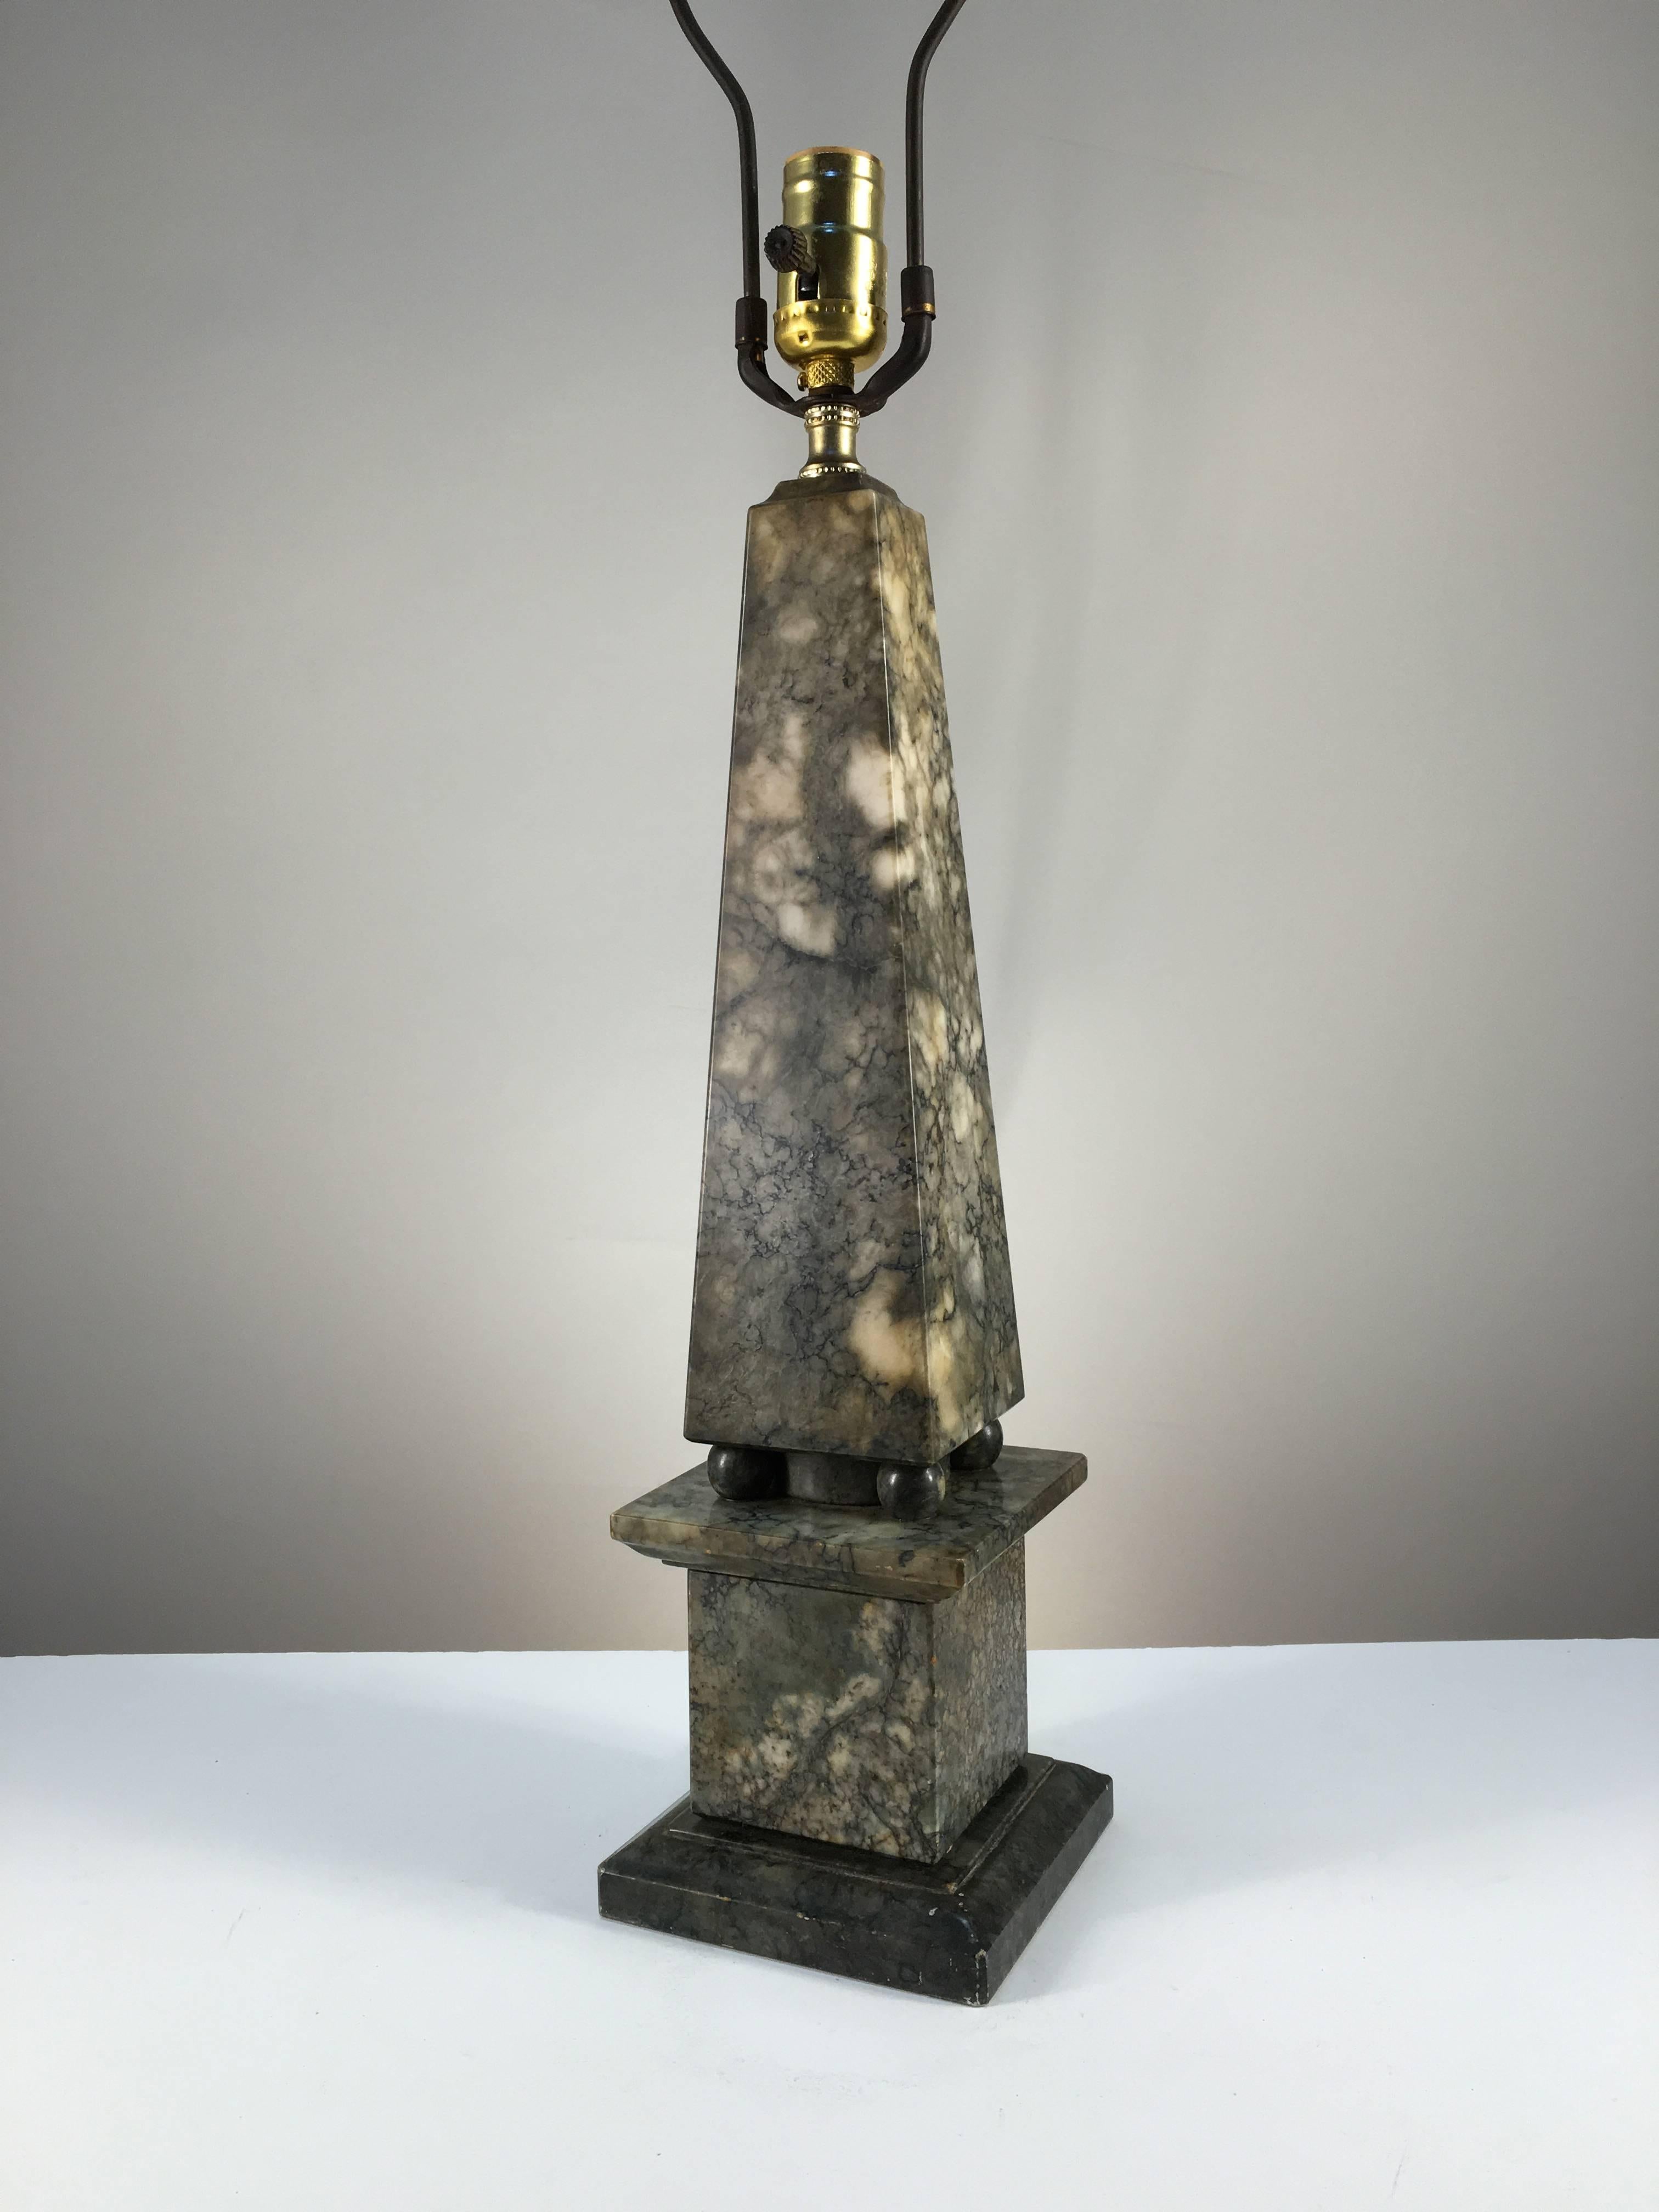 A chic obelisk-form table lamp in grey/moss marble, circa 1930. Measures: The height to top of obelisk is 20